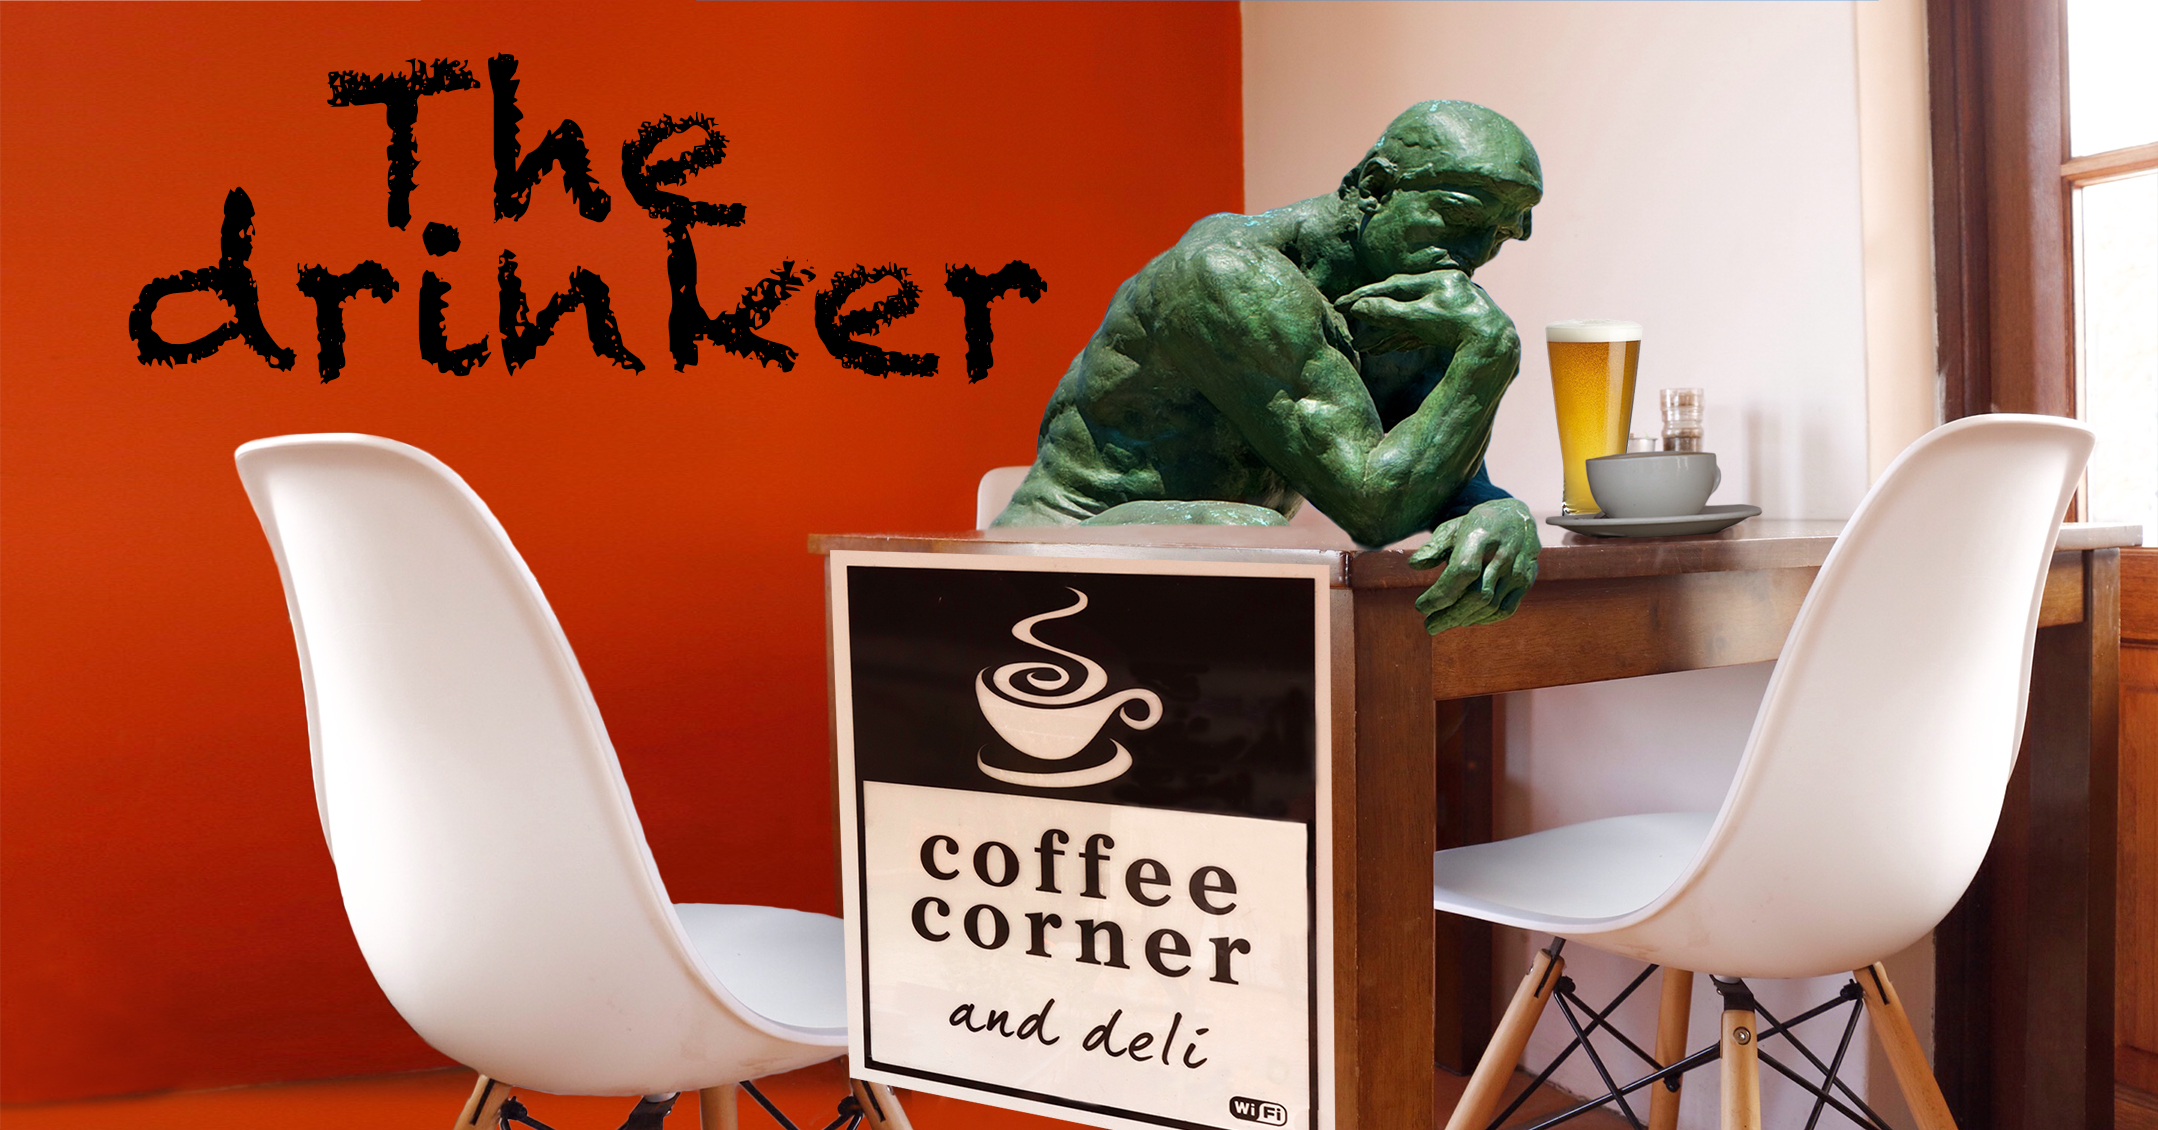 Facebook post featuring The Thinker designed for Coffee Corner by Anna Mouton.